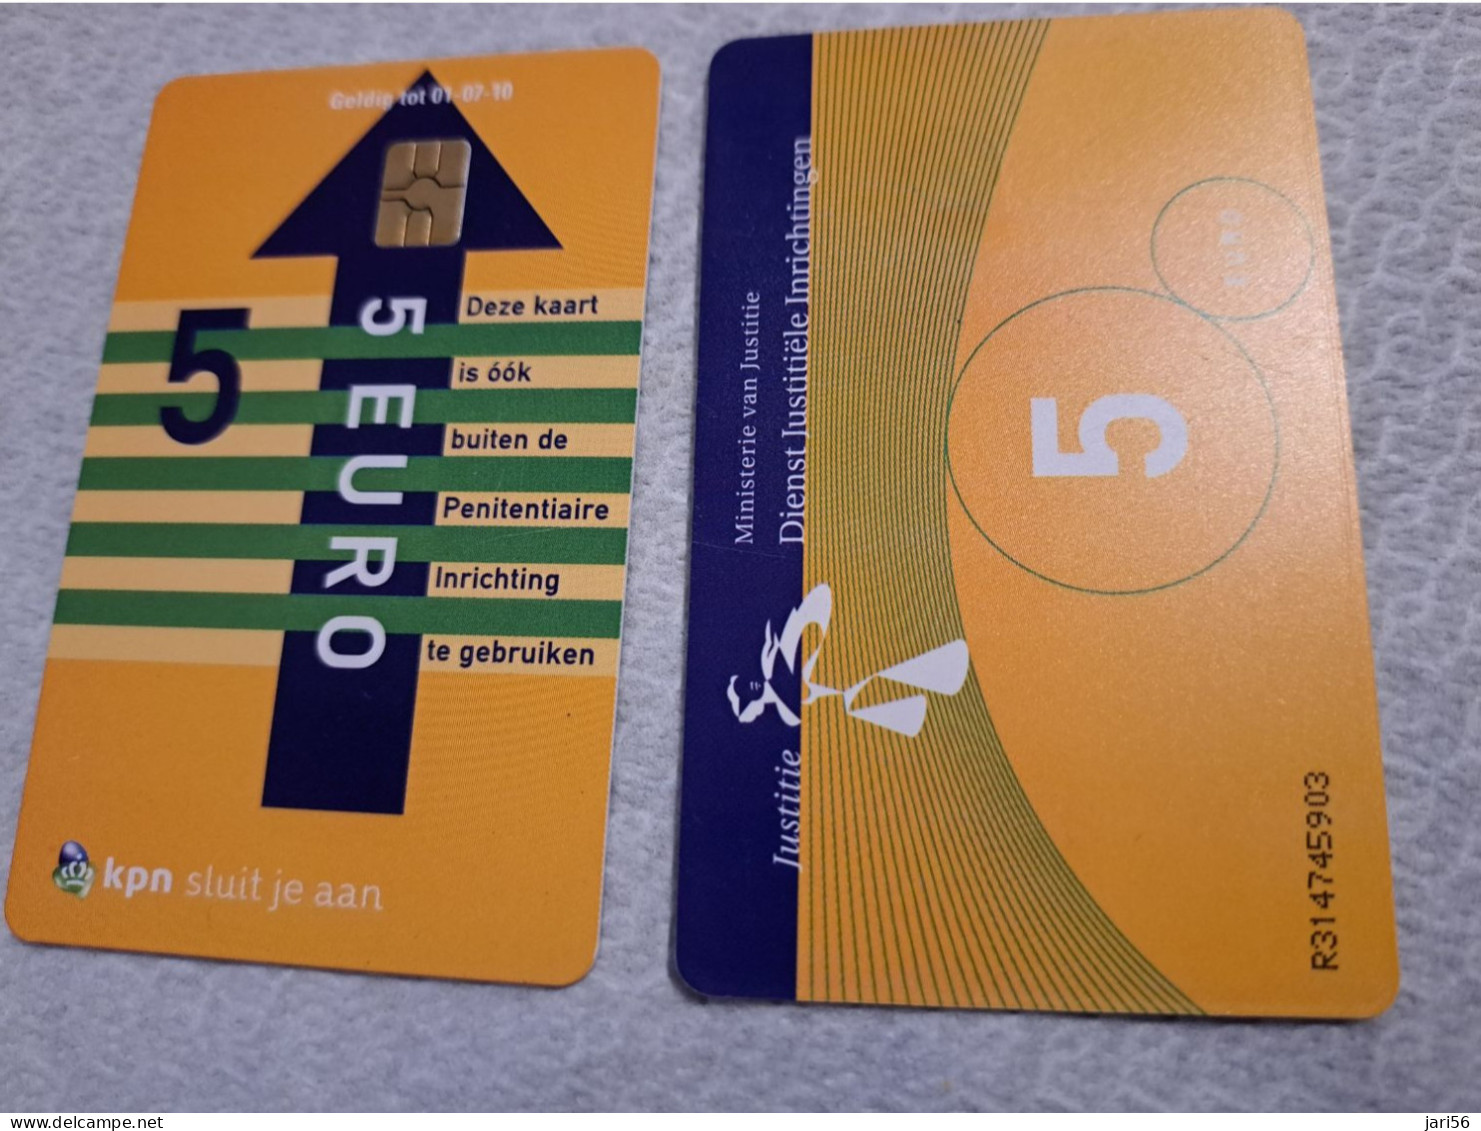 NETHERLANDS   € 5,-  ,-  / USED  / DATE  01-07-10  JUSTITIE/PRISON CARD  CHIP CARD/ USED   ** 16147** - [3] Sim Cards, Prepaid & Refills